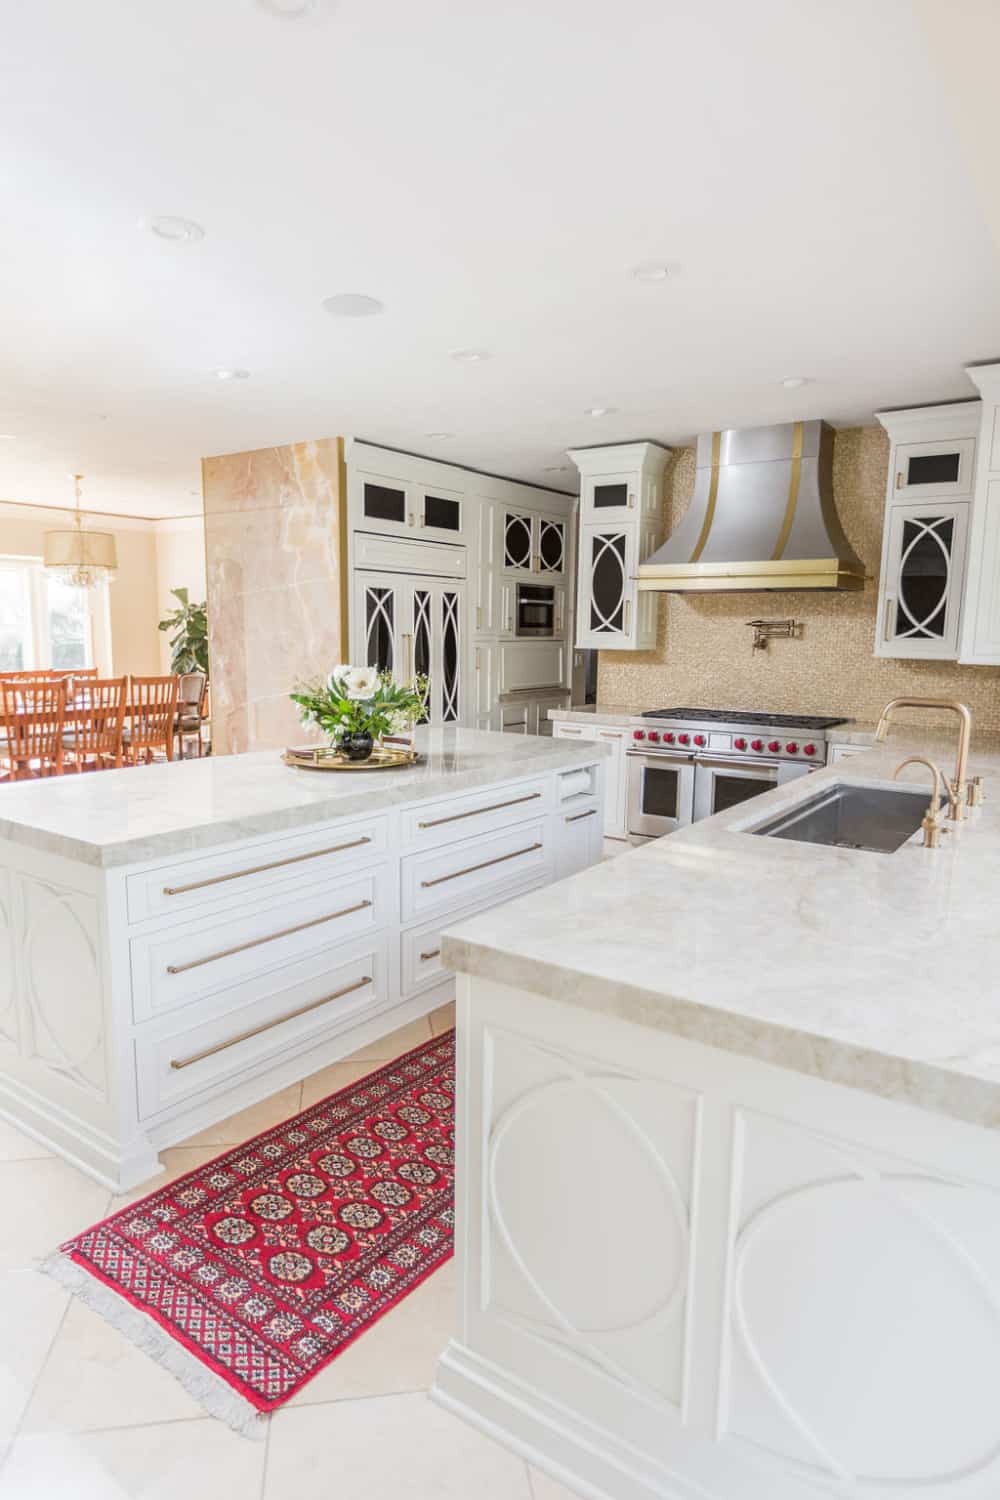 Nicholas Design Build | A spacious kitchen with white cabinets and a stylish rug, perfect for a remodel.